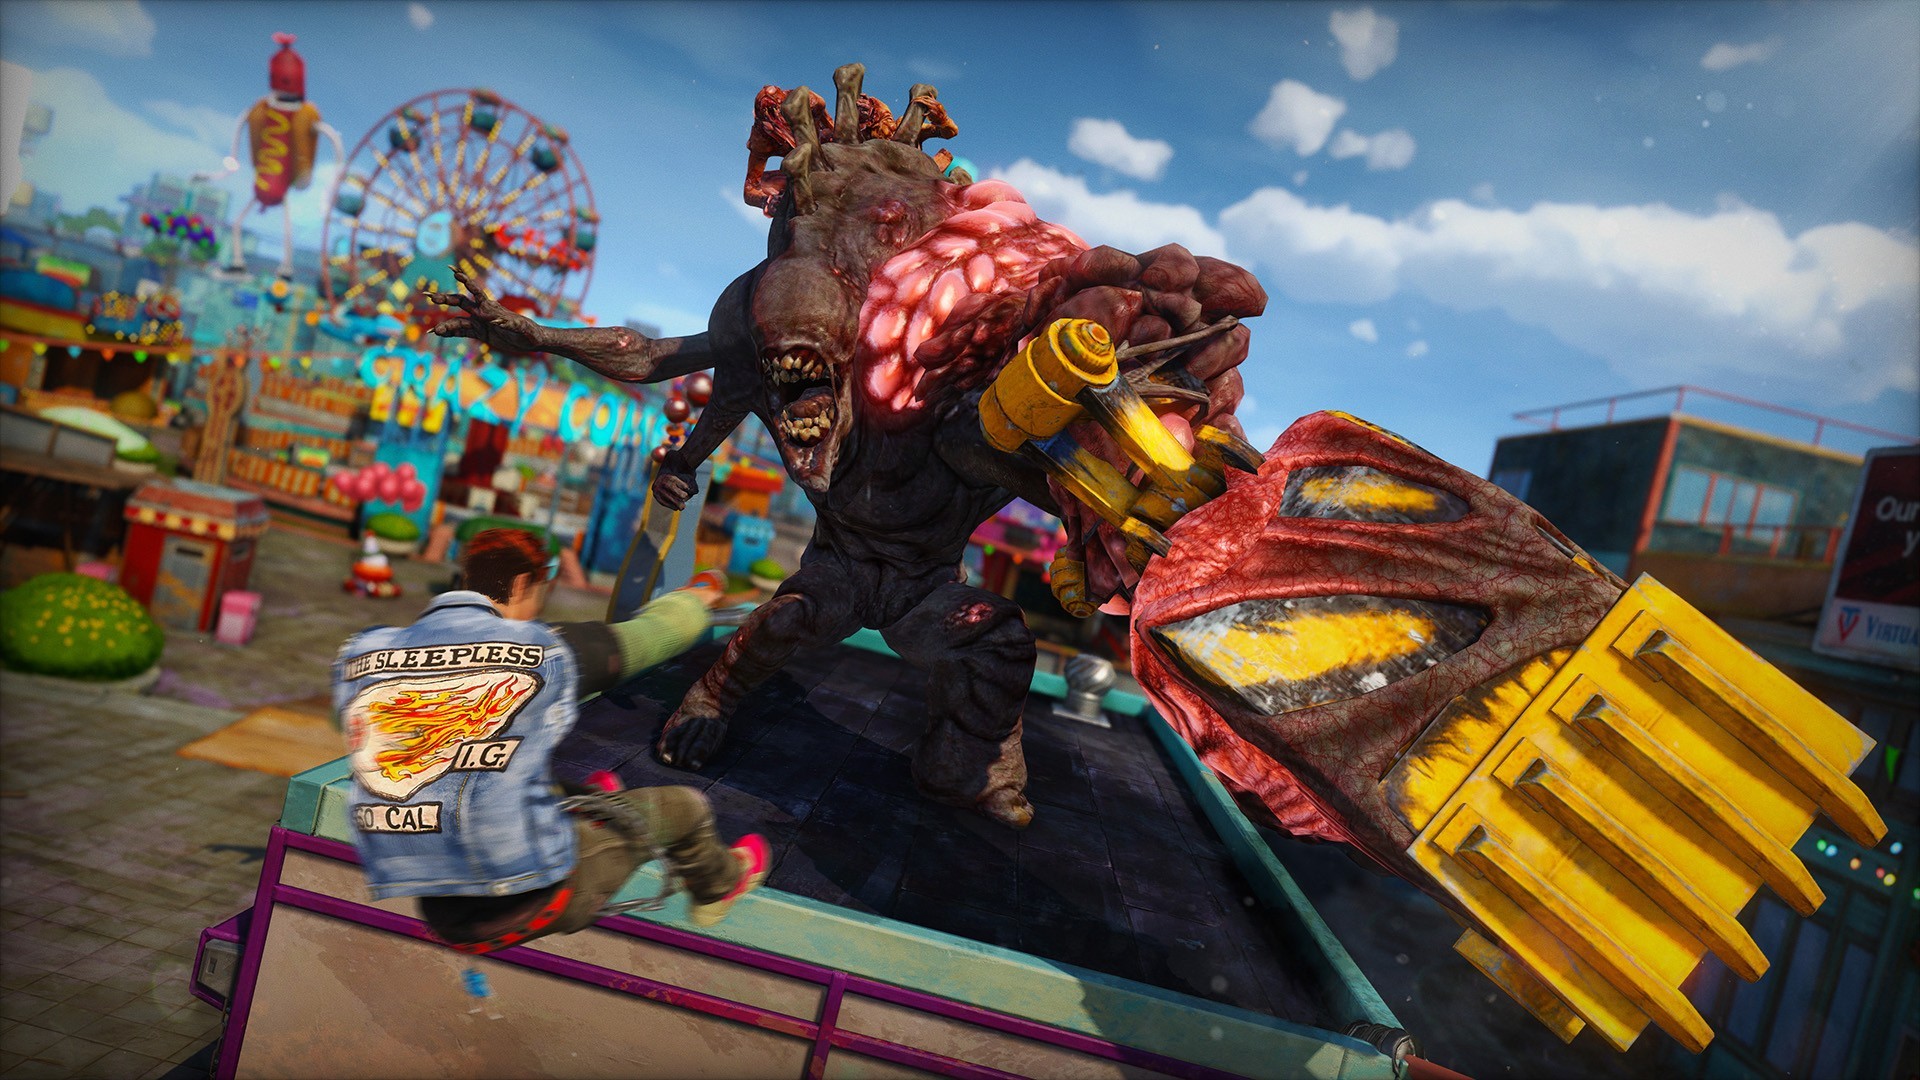 Xbox One Exclusive Sunset Overdrive is The Opposite of The Last of Us  says Insomniac - GameSpot